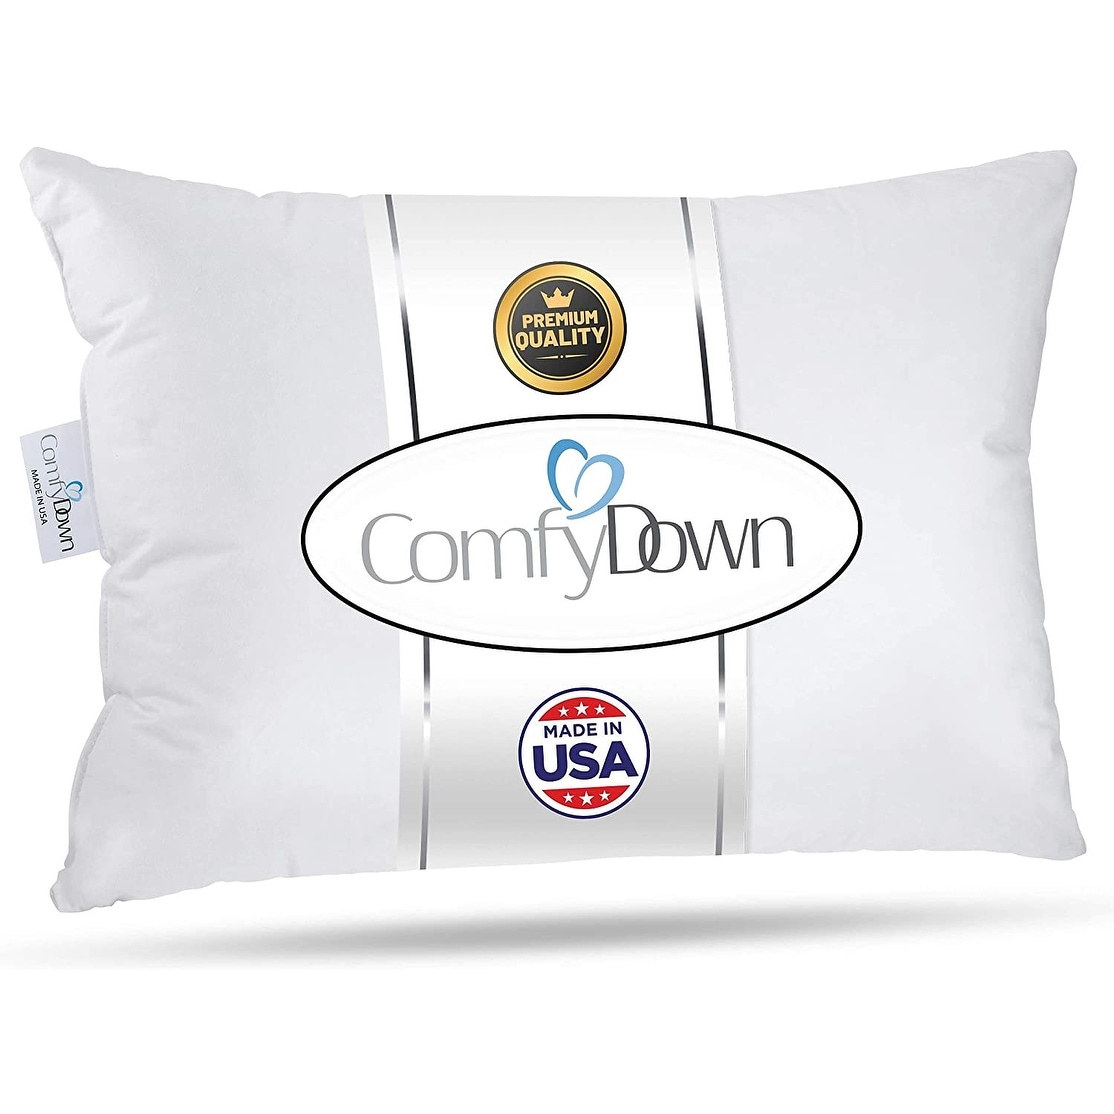 ComfyDown Travel Pillow - Filled with 800-FP Goose Down, 300-TC